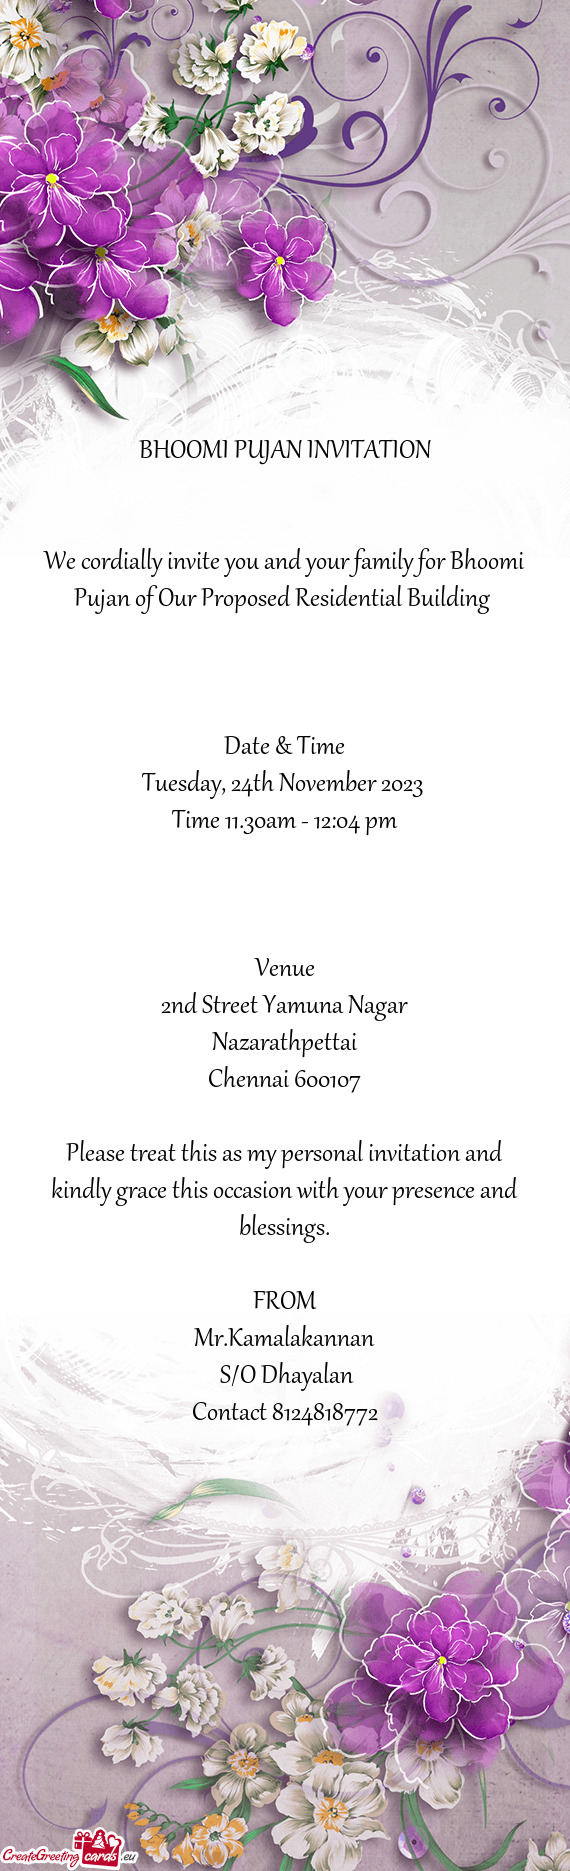 We cordially invite you and your family for Bhoomi Pujan of Our Proposed Residential Building